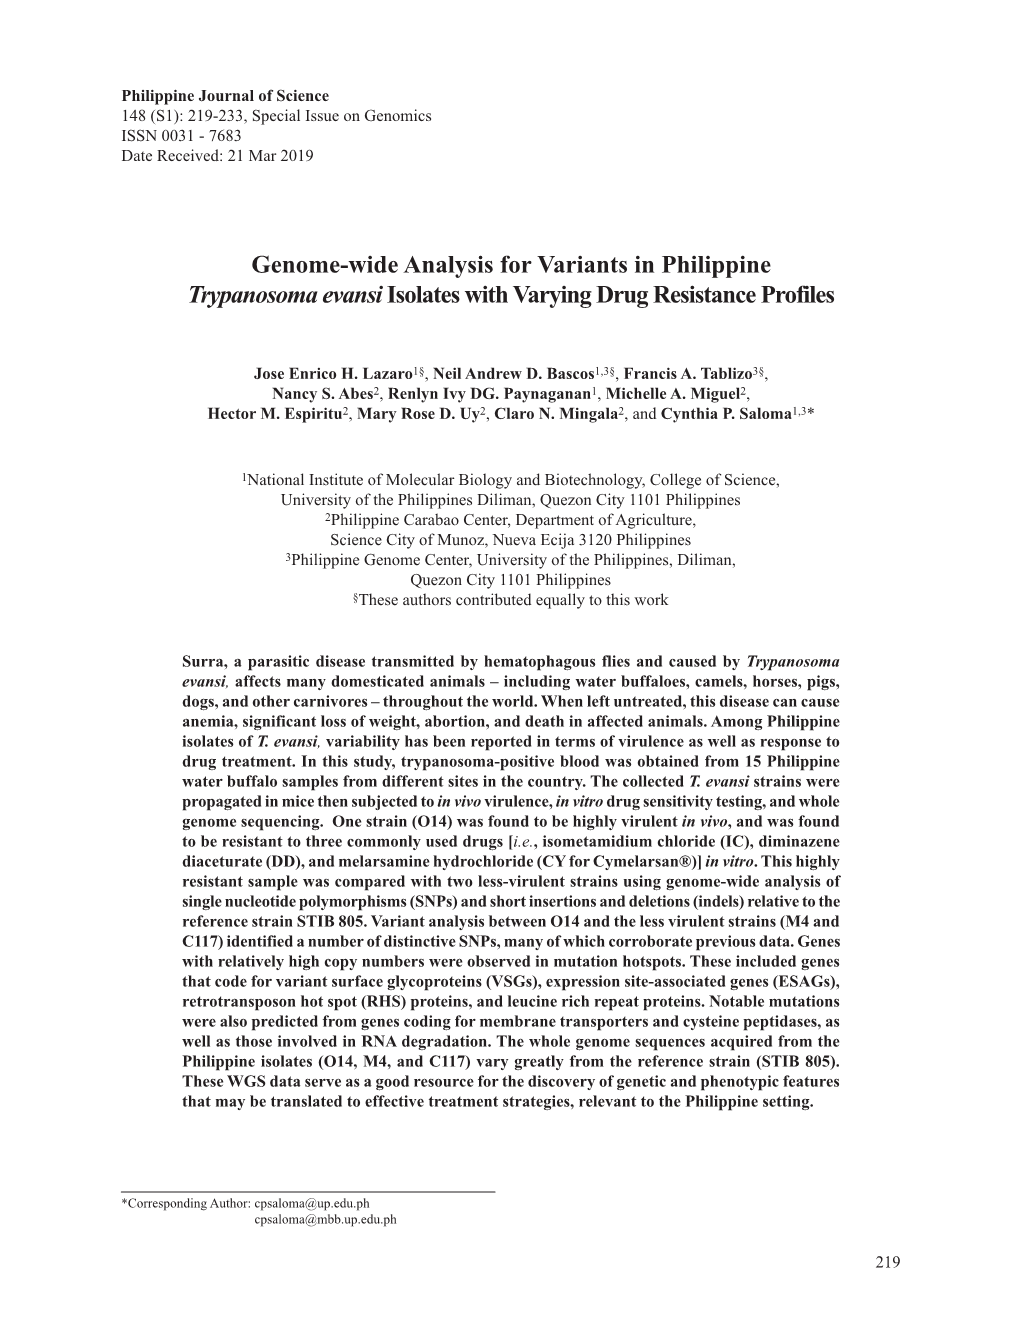 Genome-Wide Analysis for Variants in Philippine Trypanosoma Evansi Isolates with Varying Drug Resistance Profiles